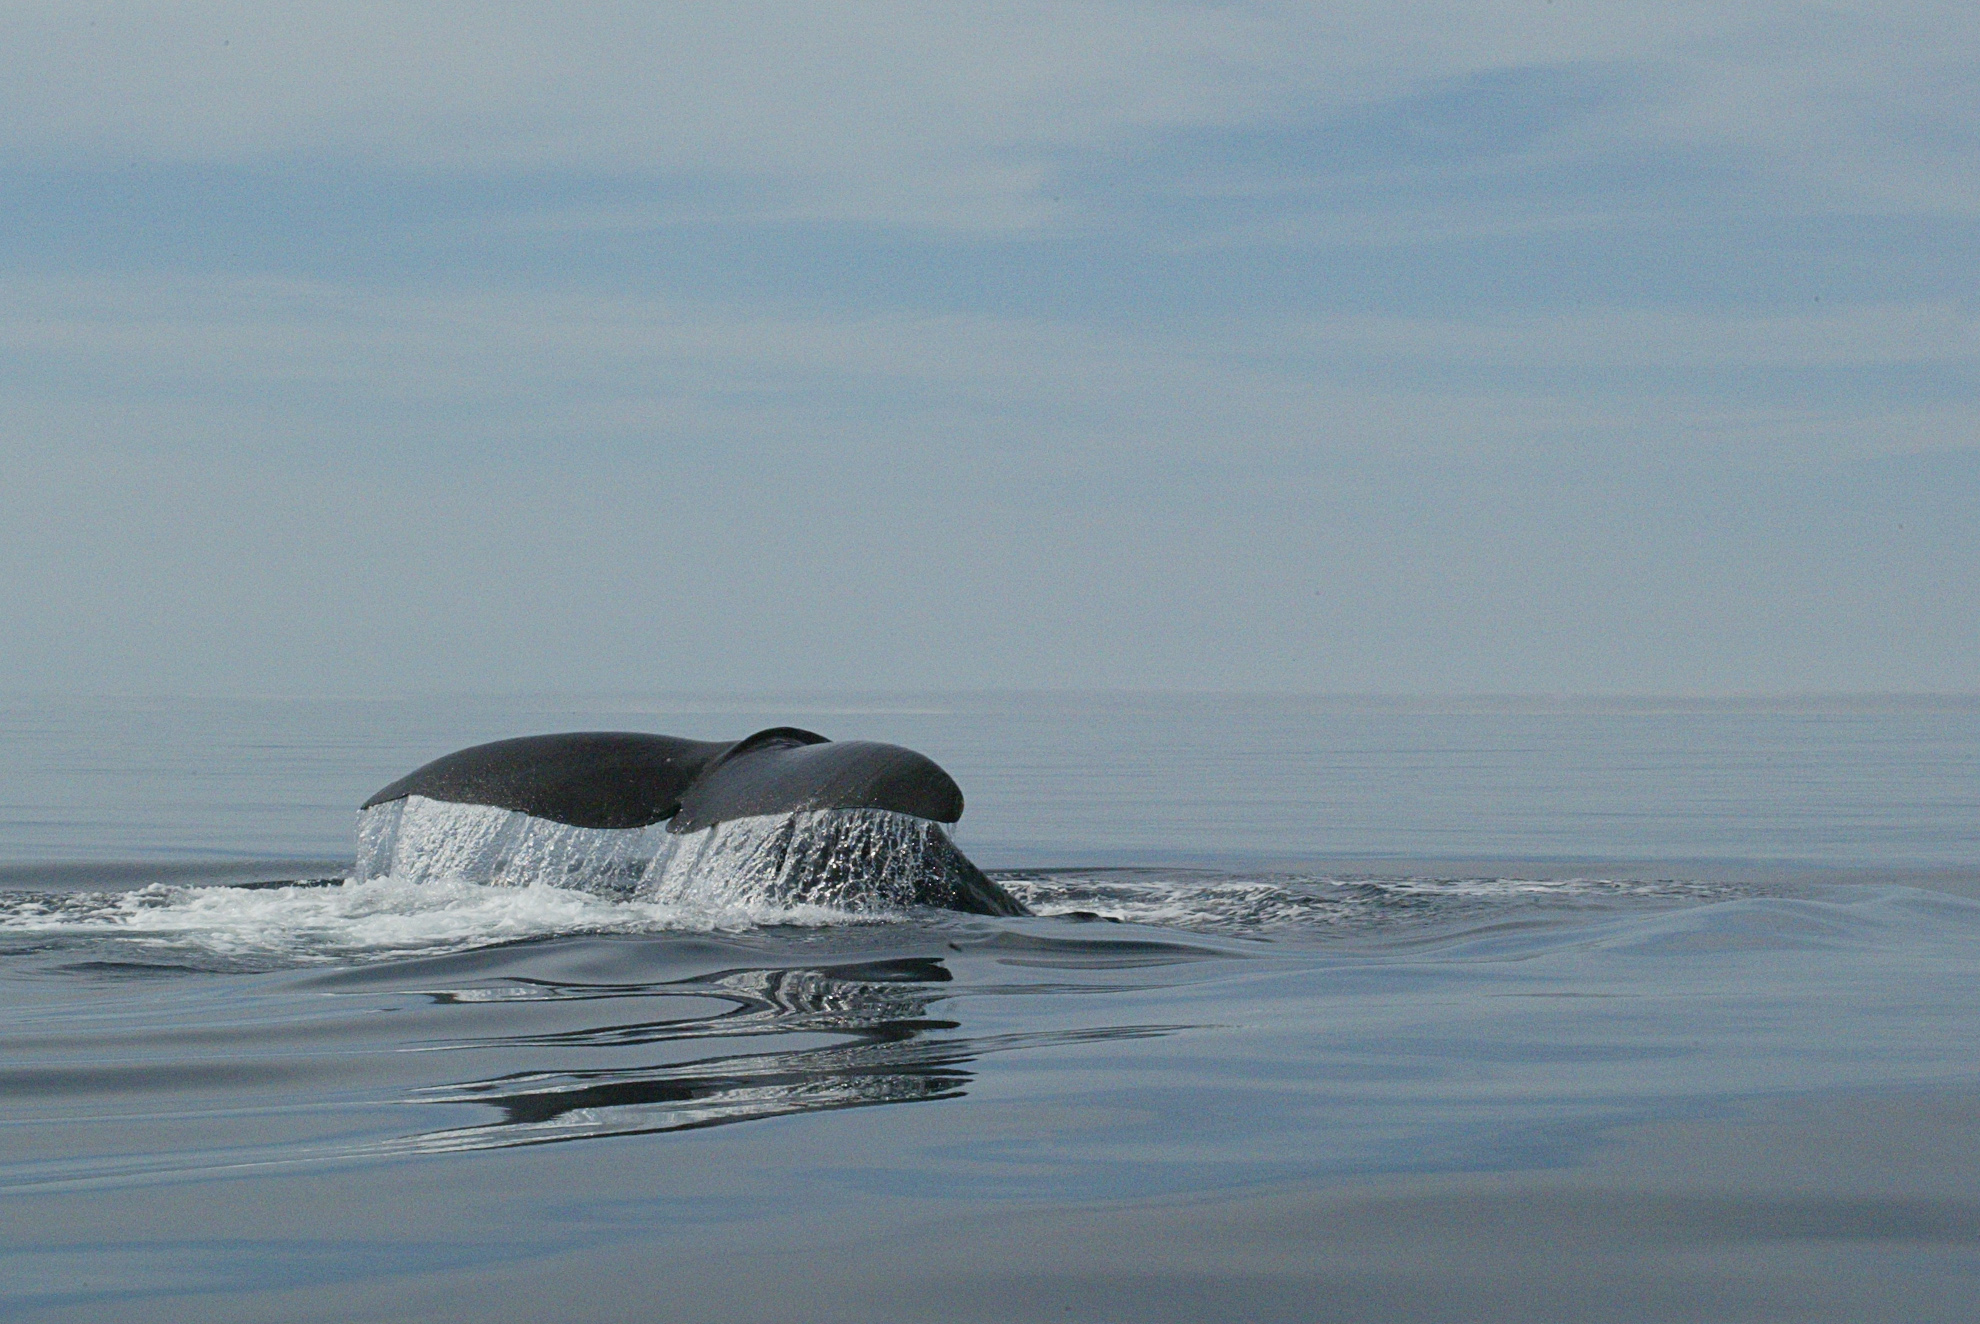 This is an image of a sperm whale fluke.